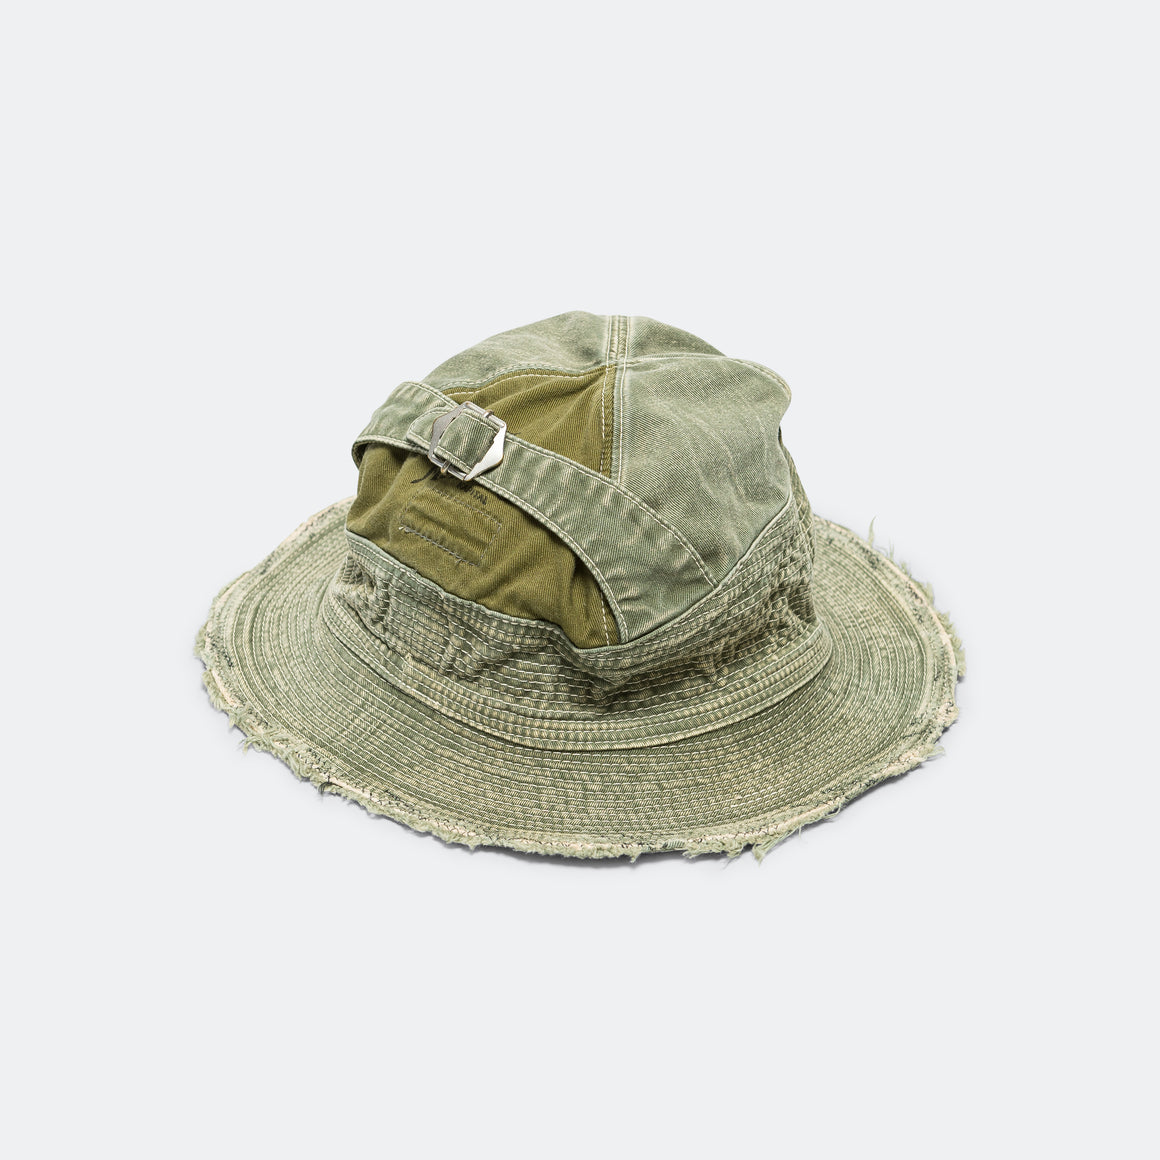 Kapital - 11.5oz THE OLD MAN AND THE SEA Hat (SOFT CRASH REMAKE) - Khaki - UP THERE